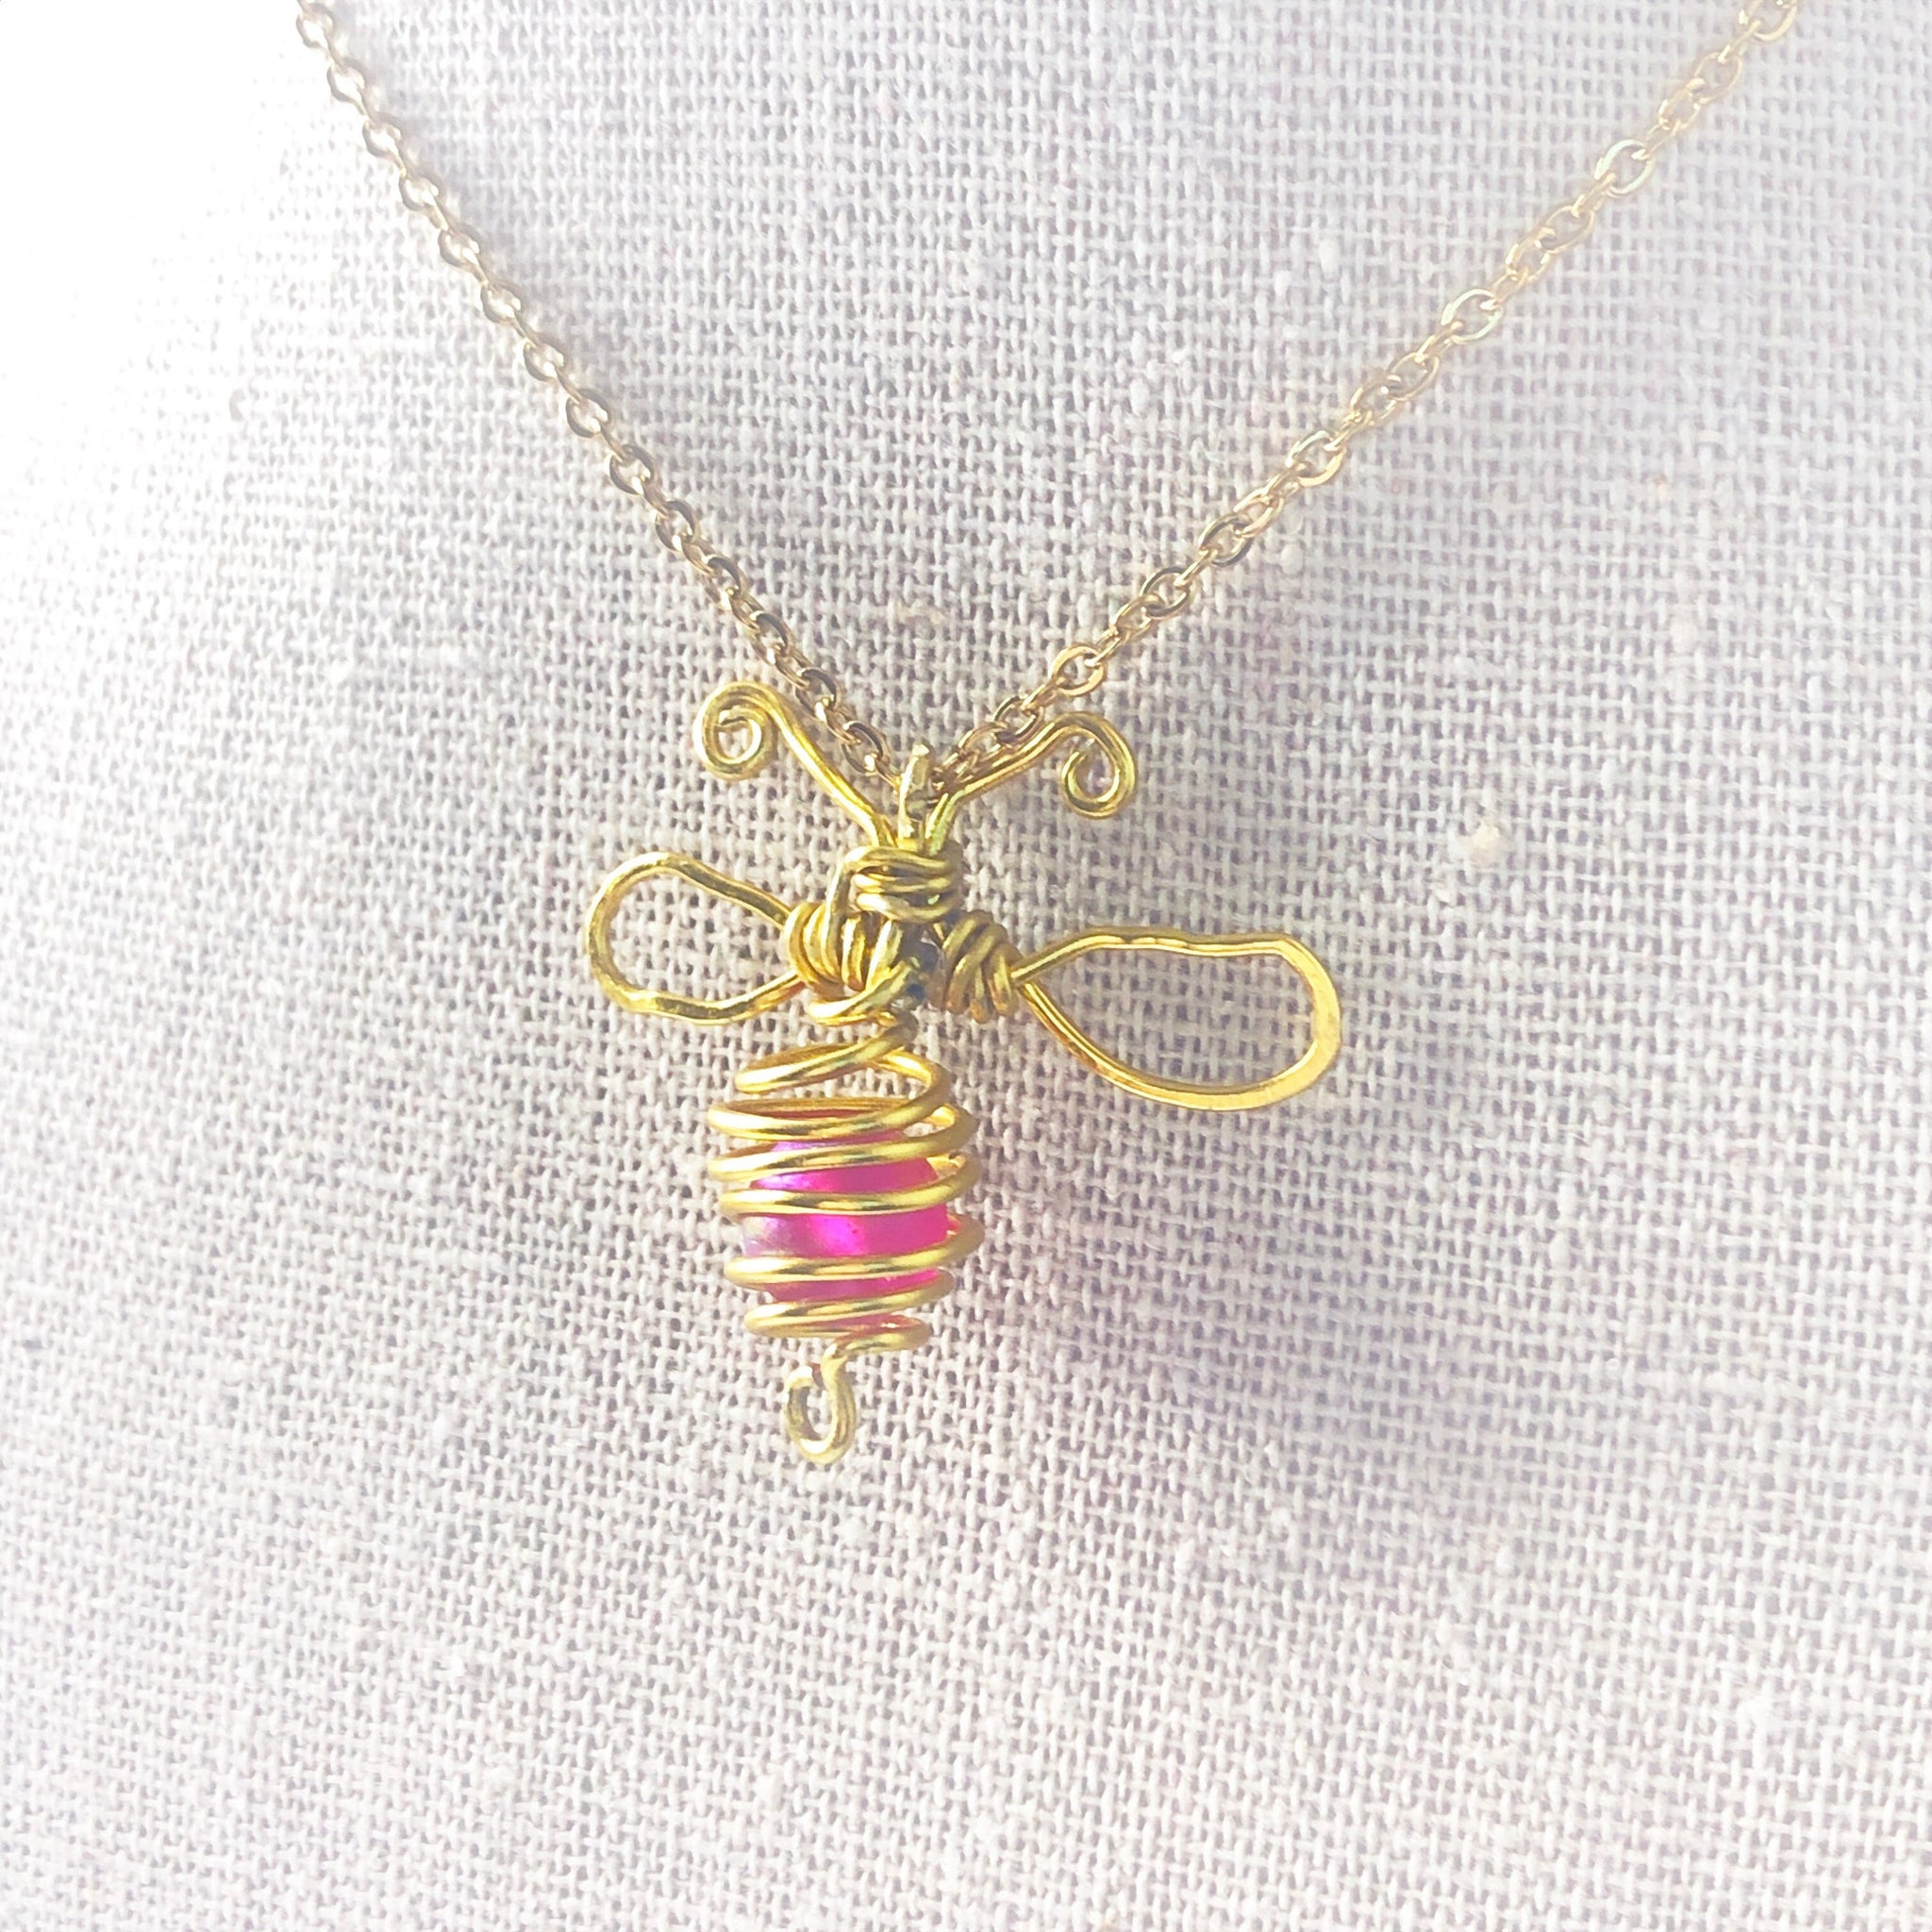 Honey Bee Charm | Large Fly Charm | Big Insect Pendant | Filigree Hollow Fruit Bug Charm | Creepy Insect Jewellery | Necklace Making | Bag Charm DIY (